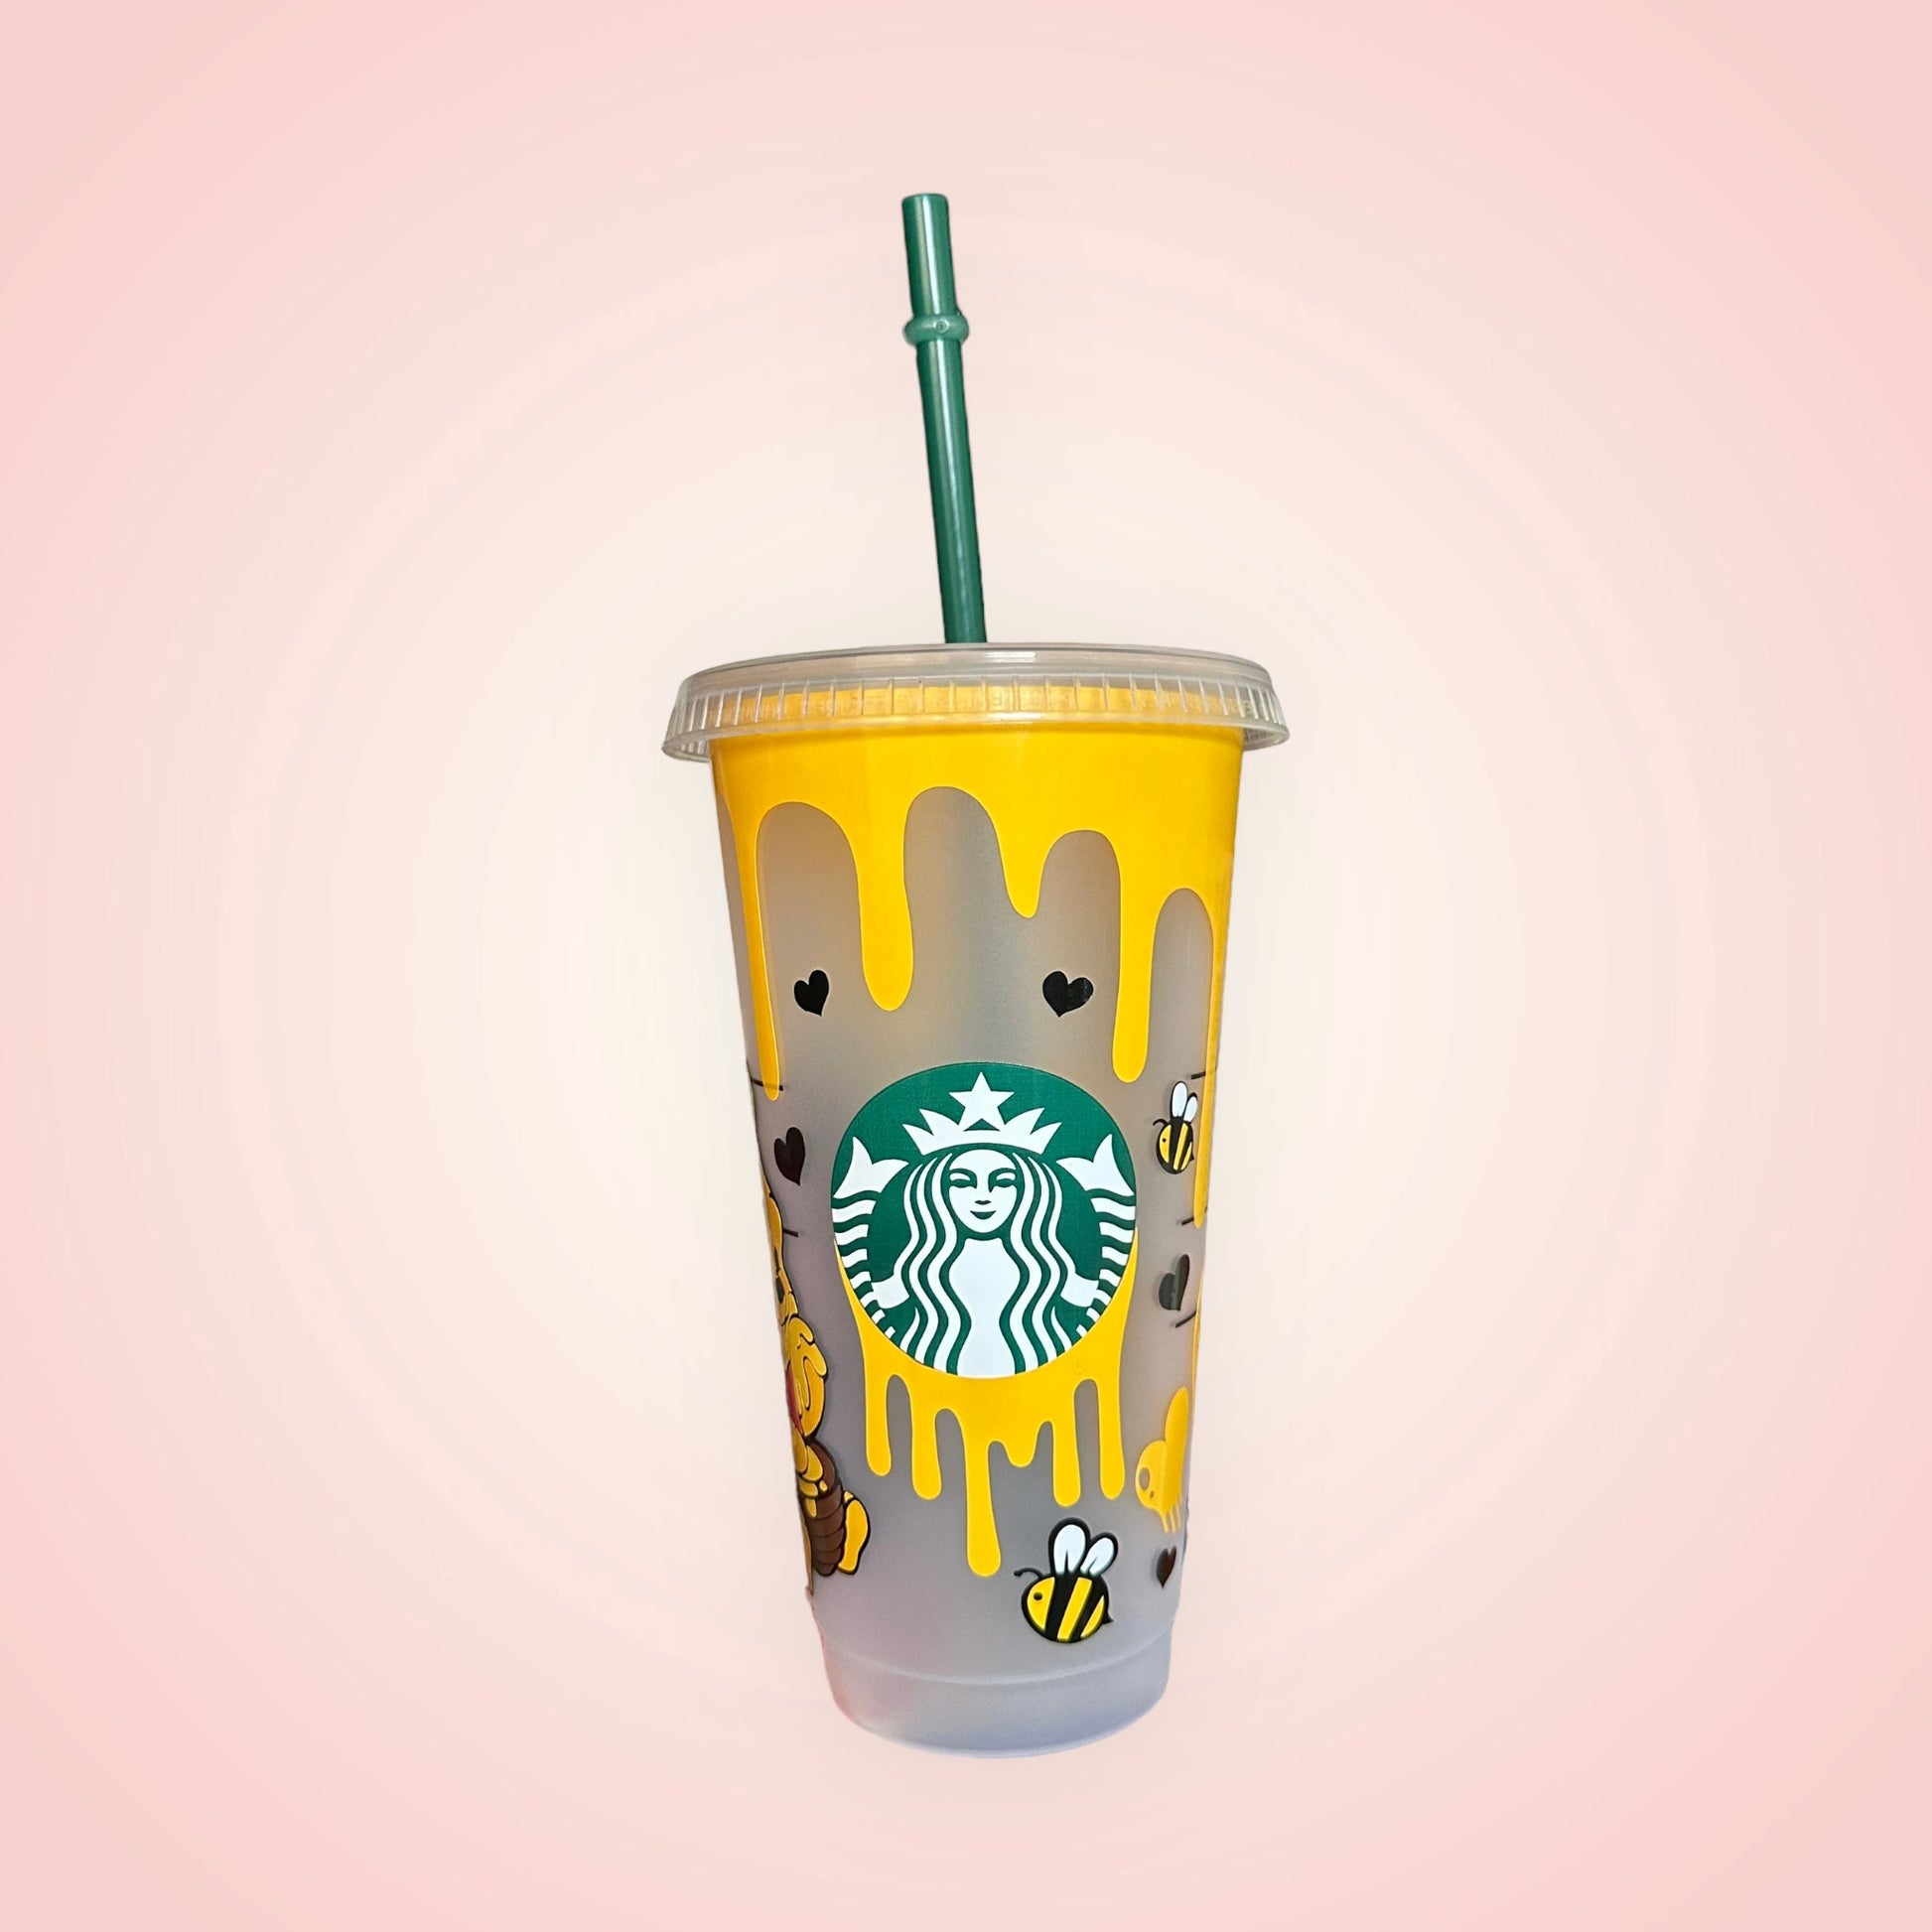 Gobelet / Cup Starbucks édition Winnie l'Ourson – creamimy